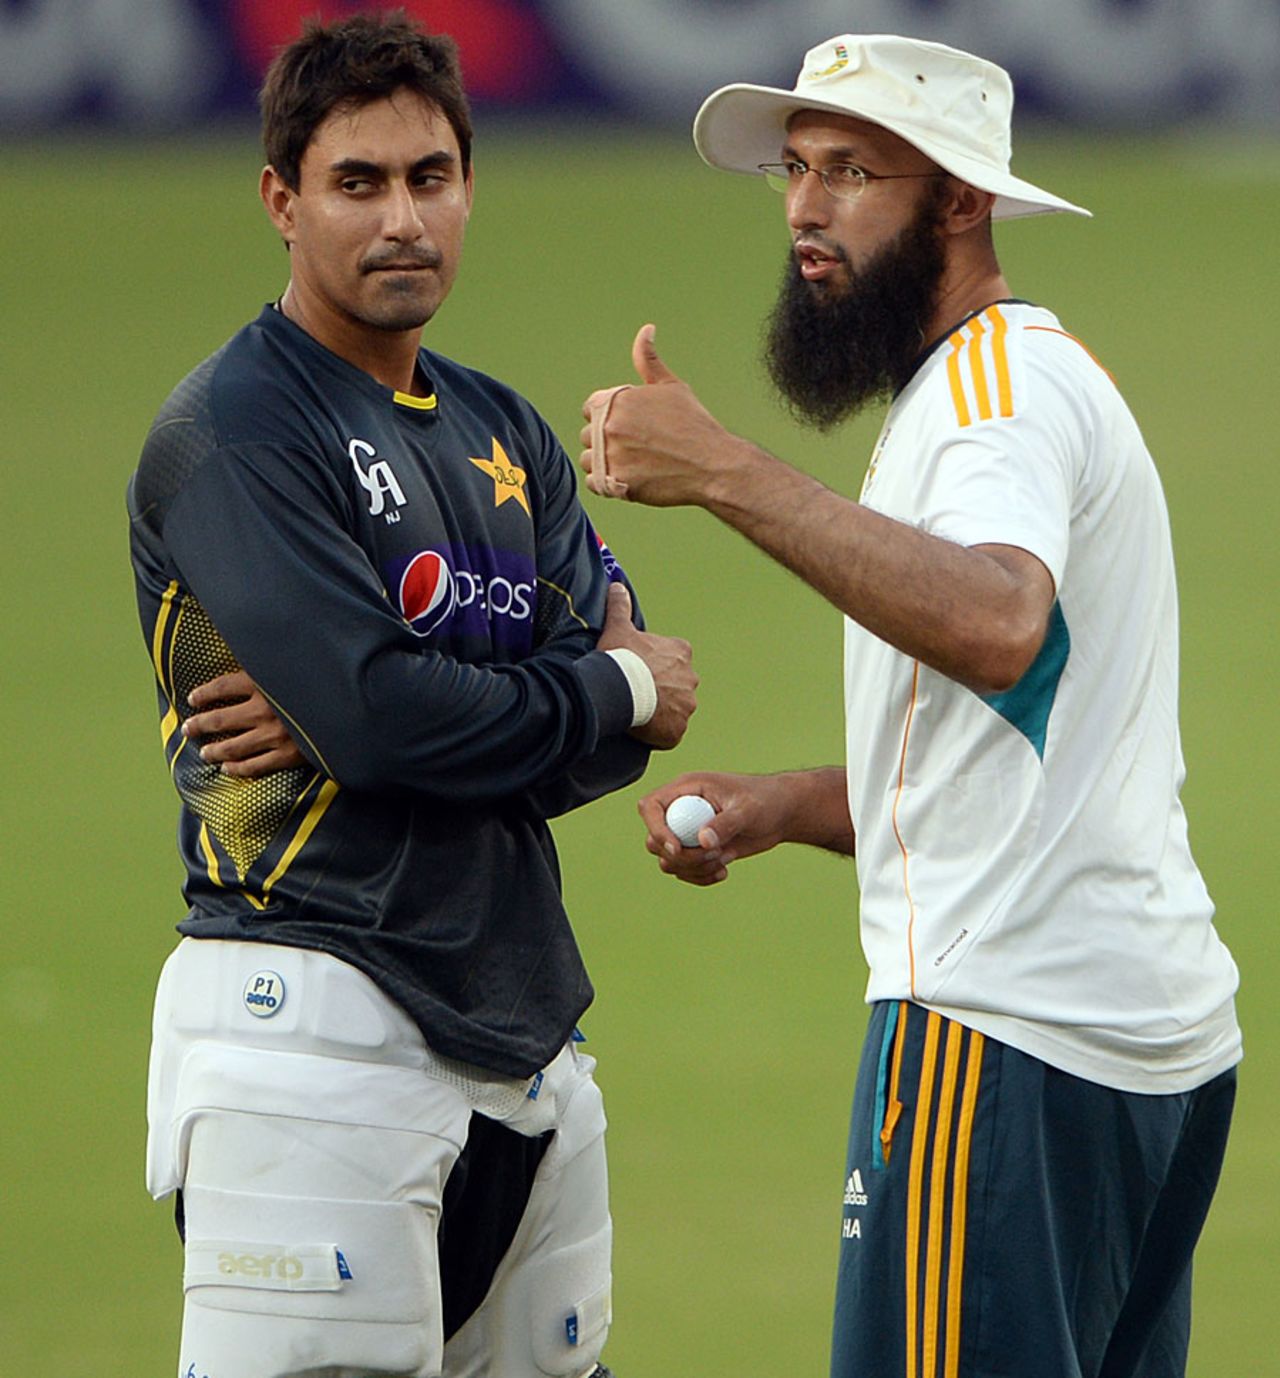 Nasir Jamshed and Hashim Amla have a chat during a nets session, Dubai, November 3, 2013